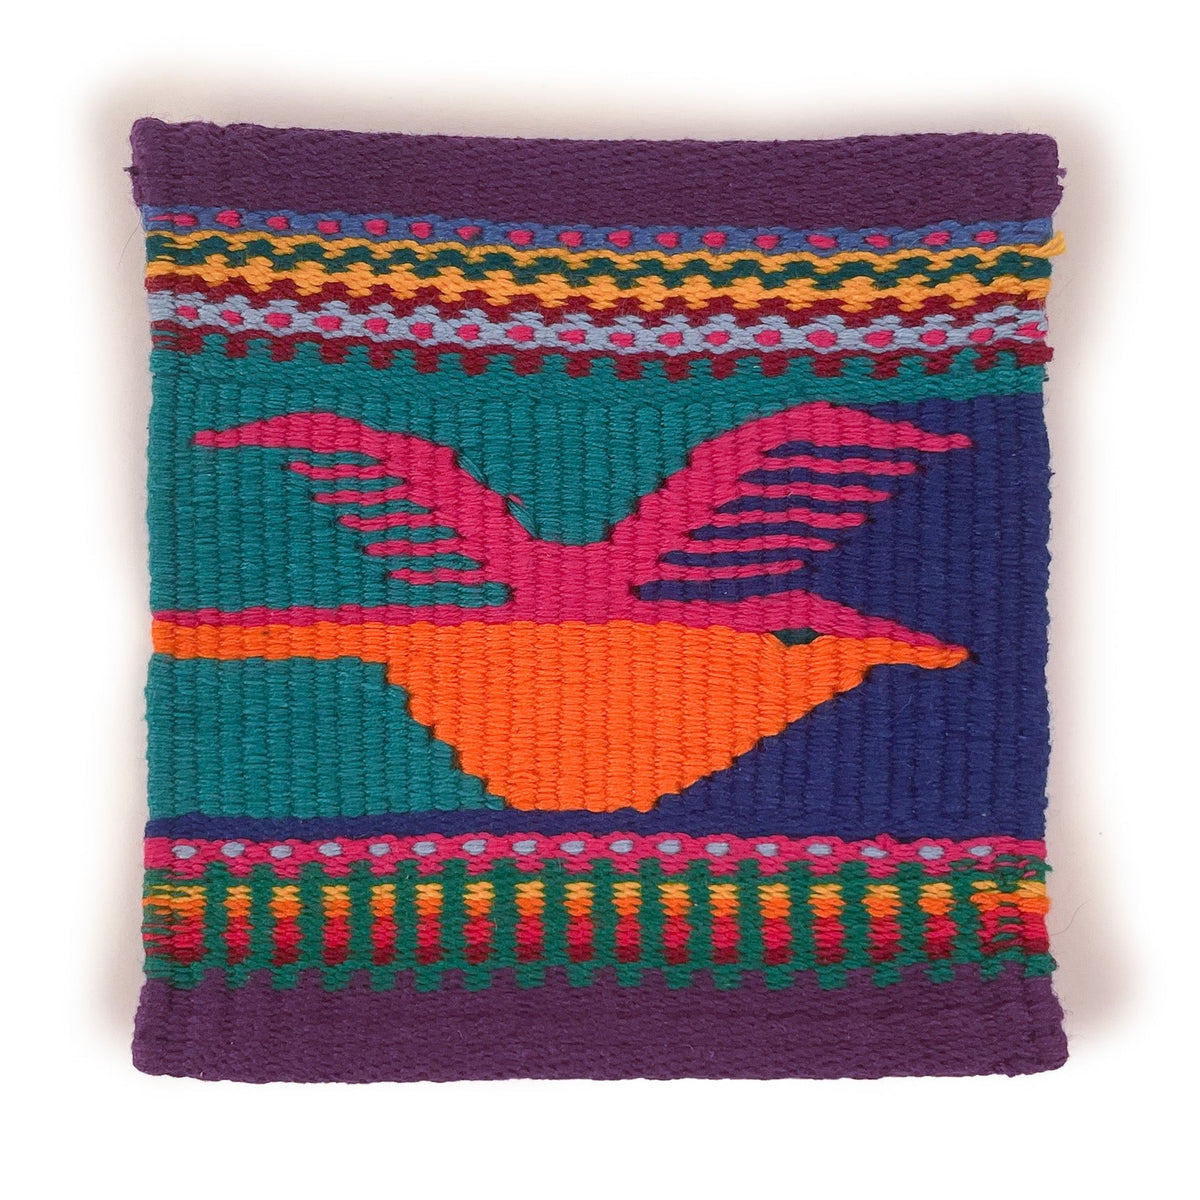 Tapestry woven coaster, featuring a bird in pink and orange on a multicolor background of teal and deep blue, with purple border and multicolor striped details